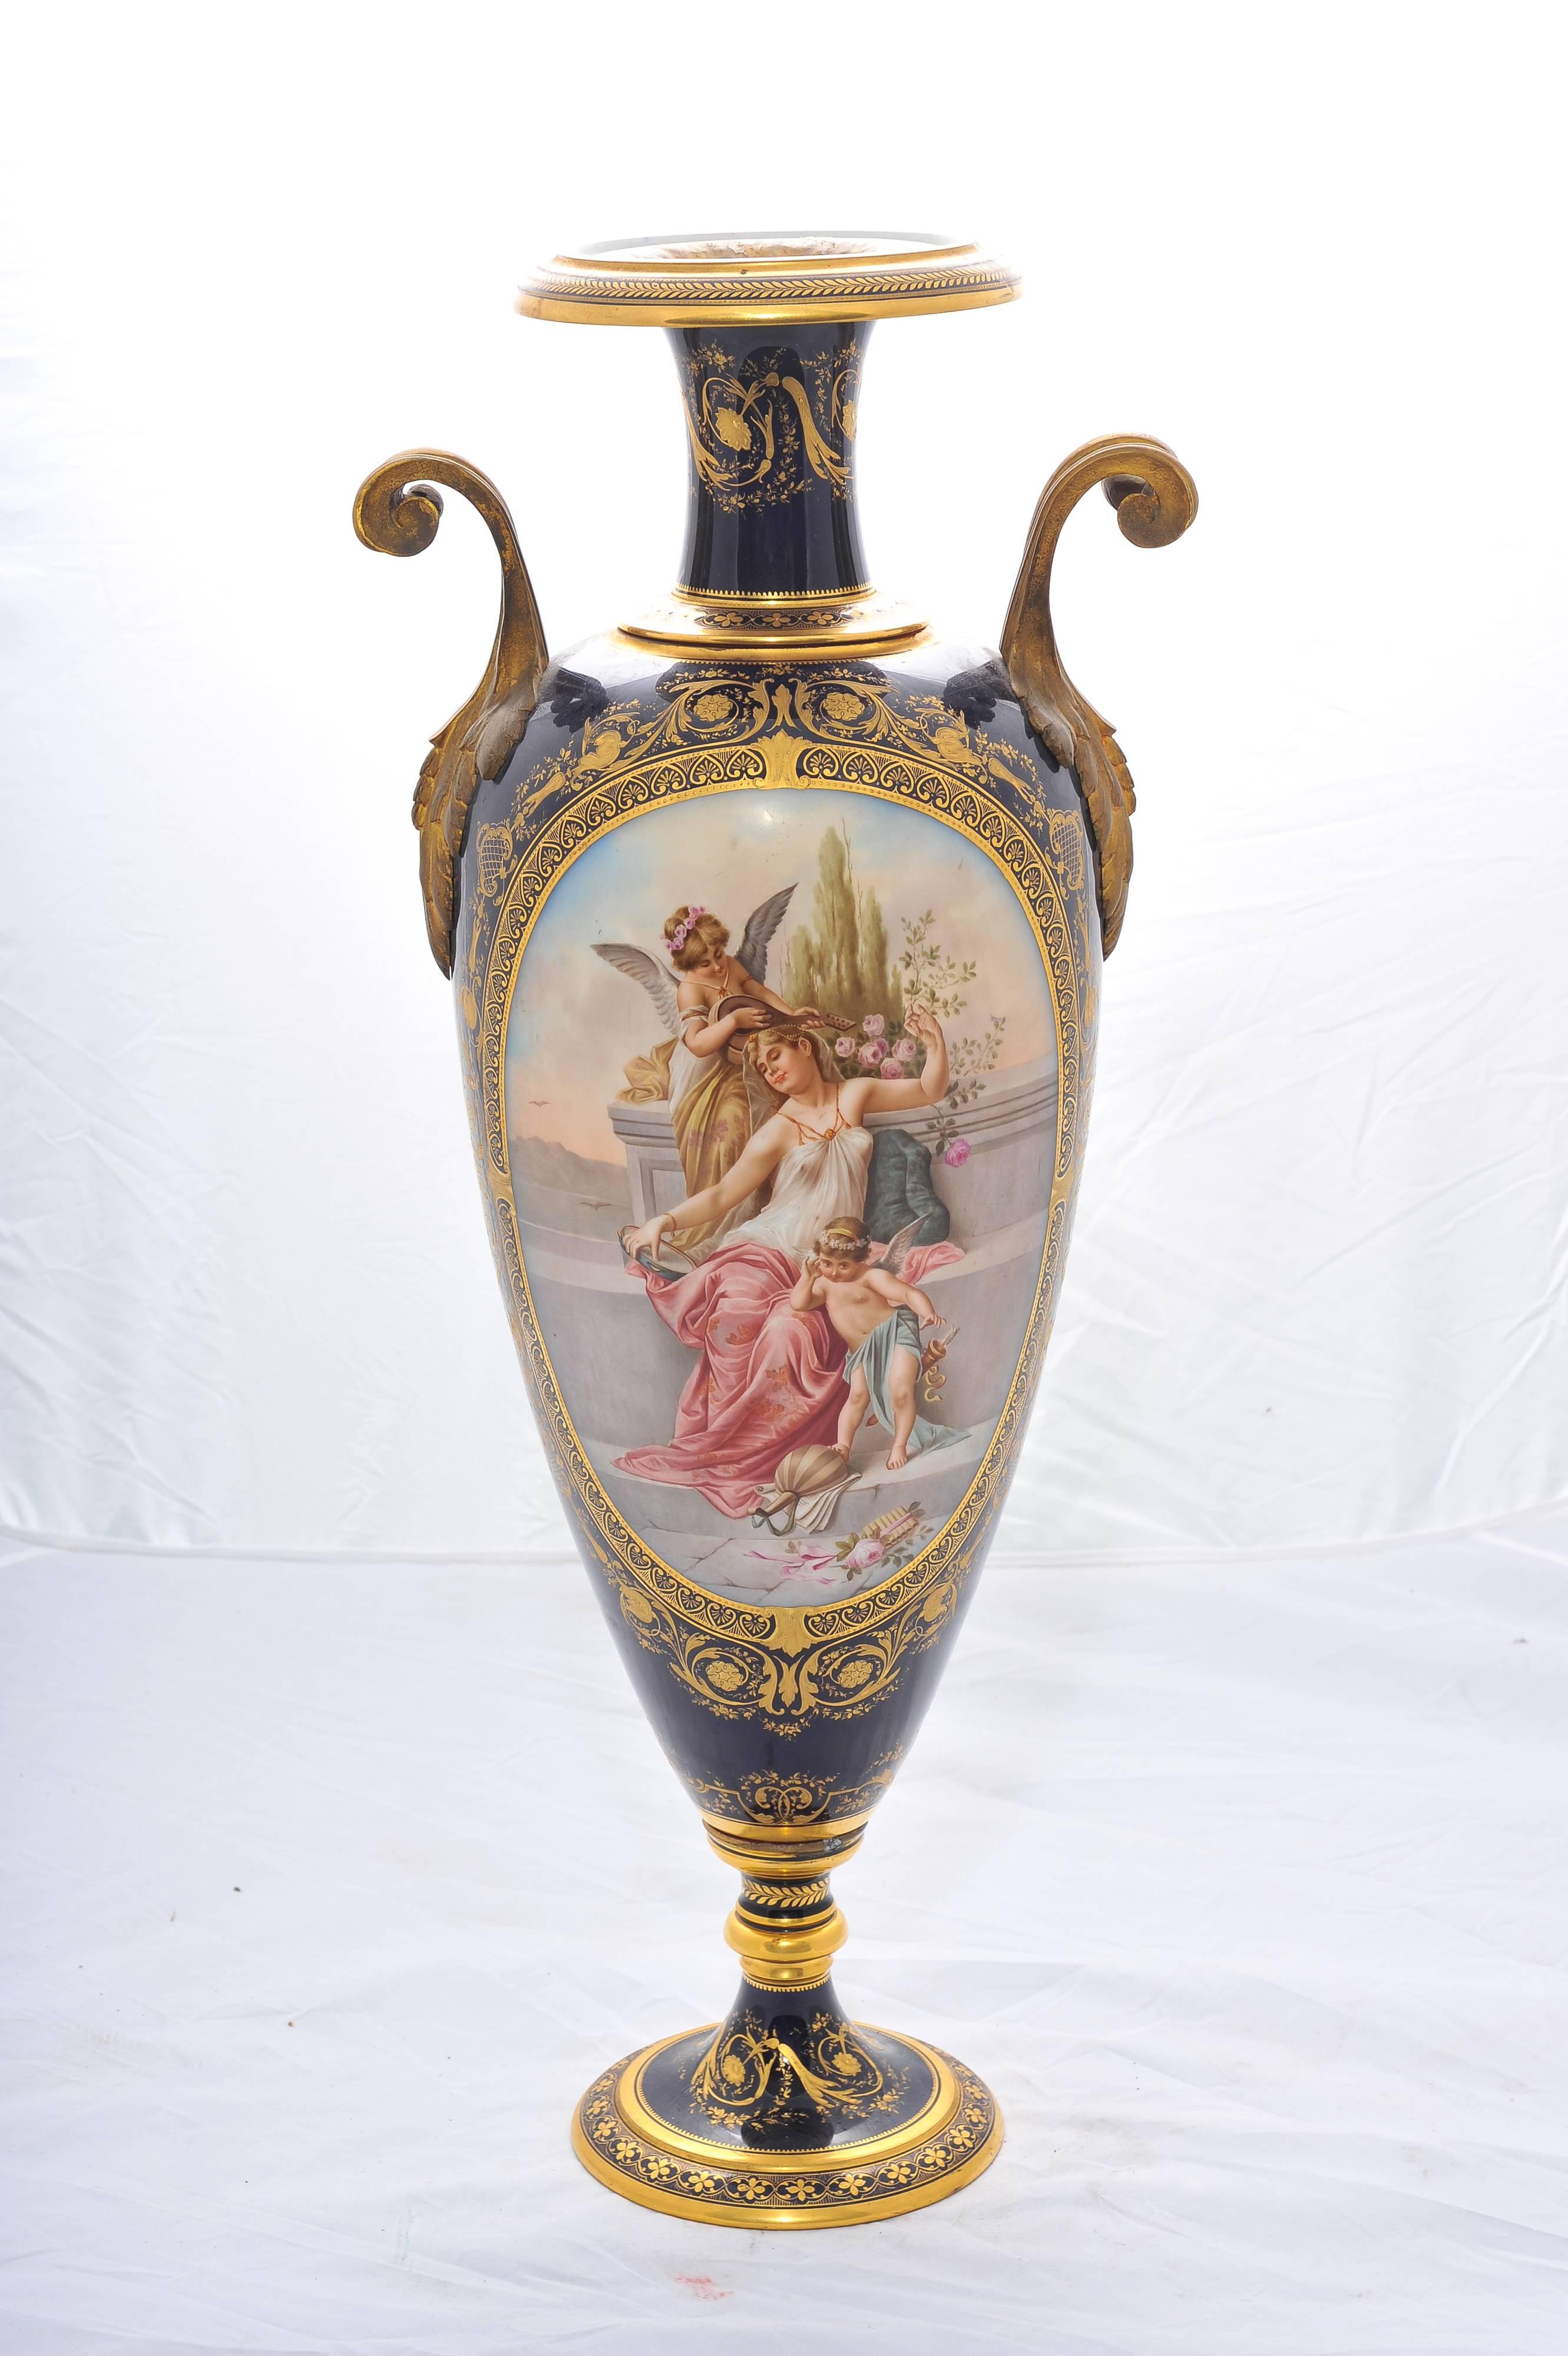 A beautiful French 'Sèvres' porcelain two handle vase, depicting a classical scene of a young maiden playing music with cherubs around her. Set in a dark blue back ground and gilded decoration.